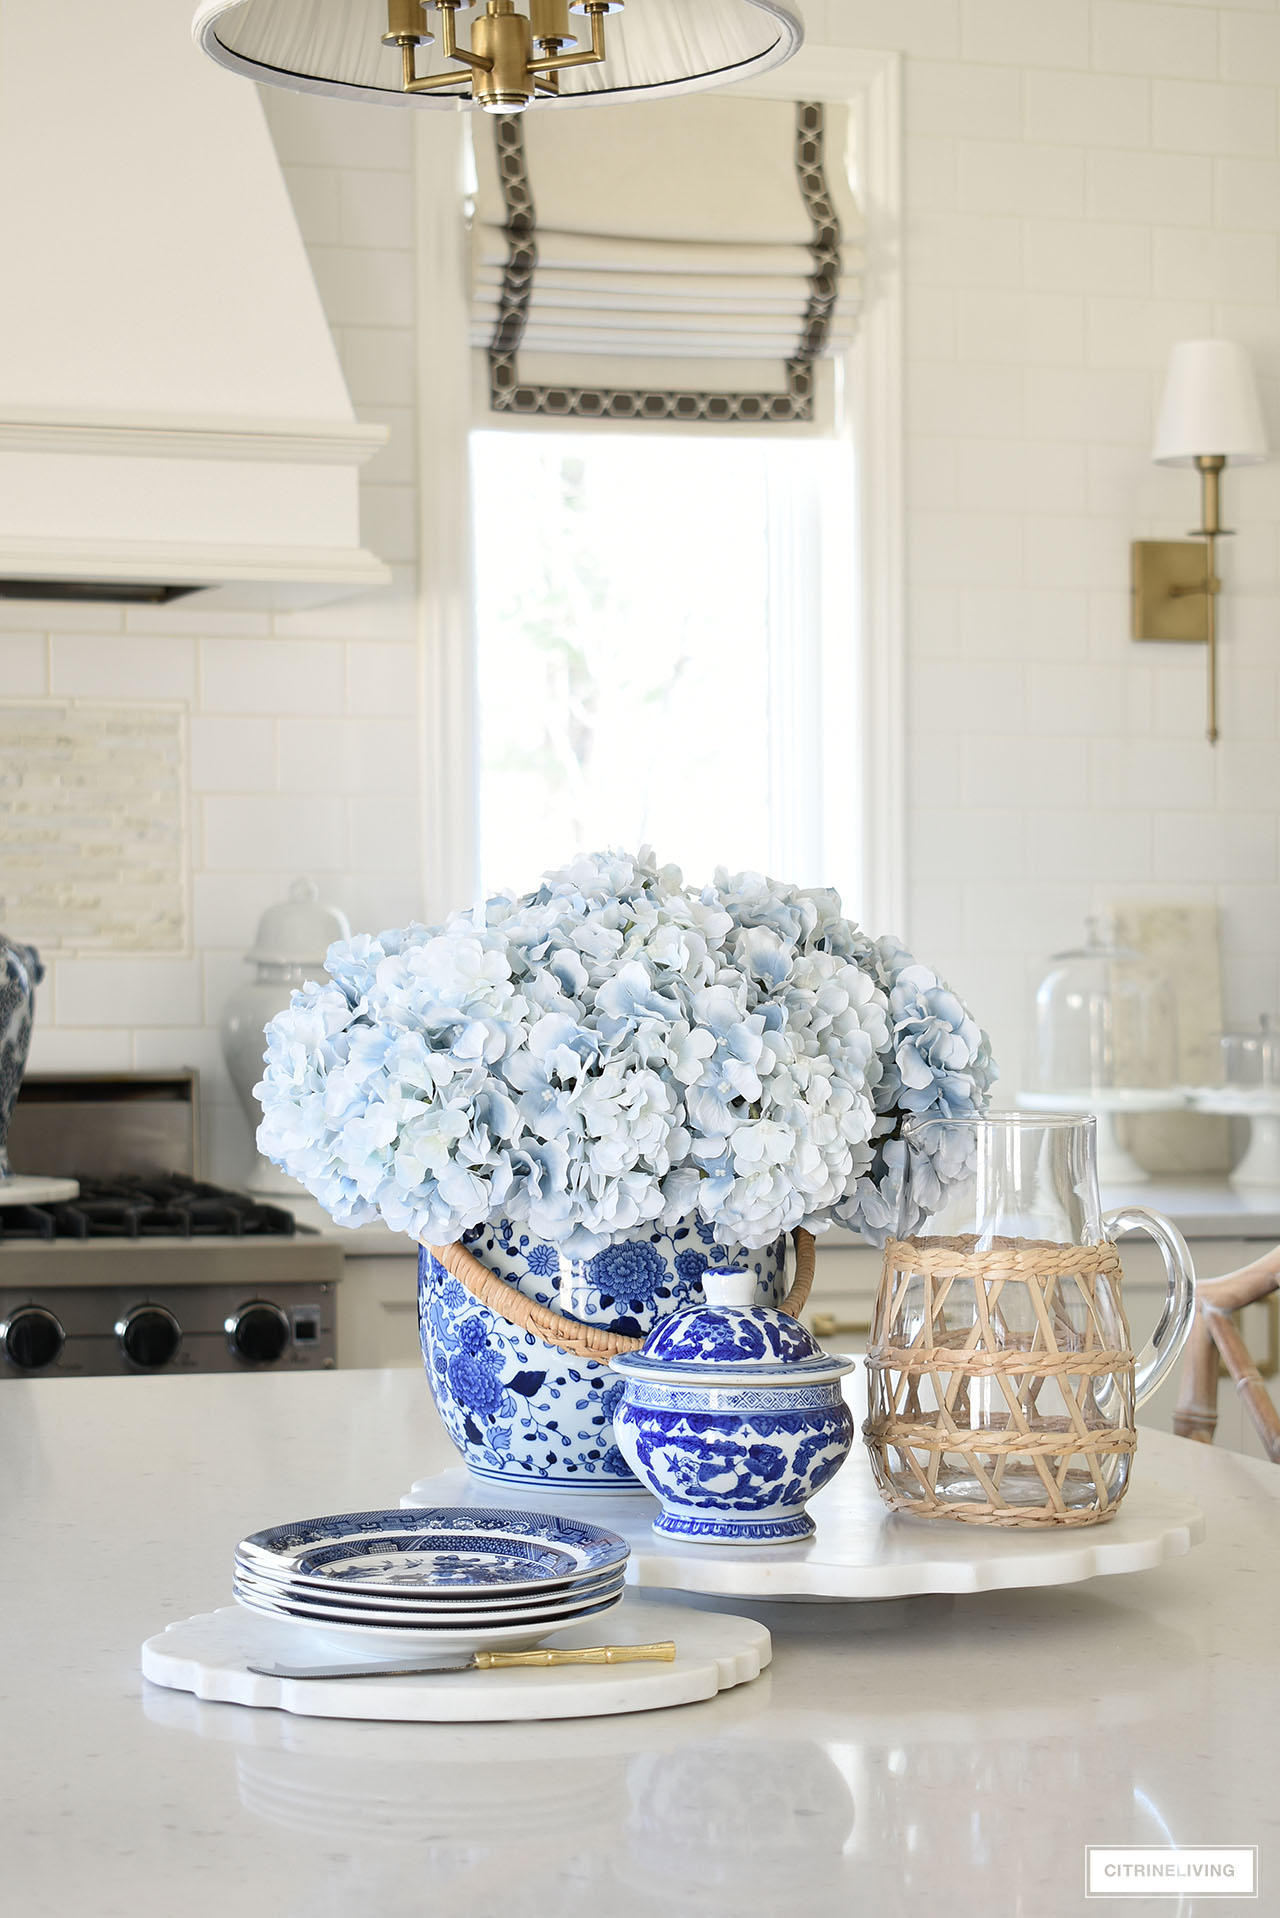 A pretty kitchen island vignette with blue and white chinoiserie, light blue hydrangeas, marble trays and a woven wrapped glass pitcher.